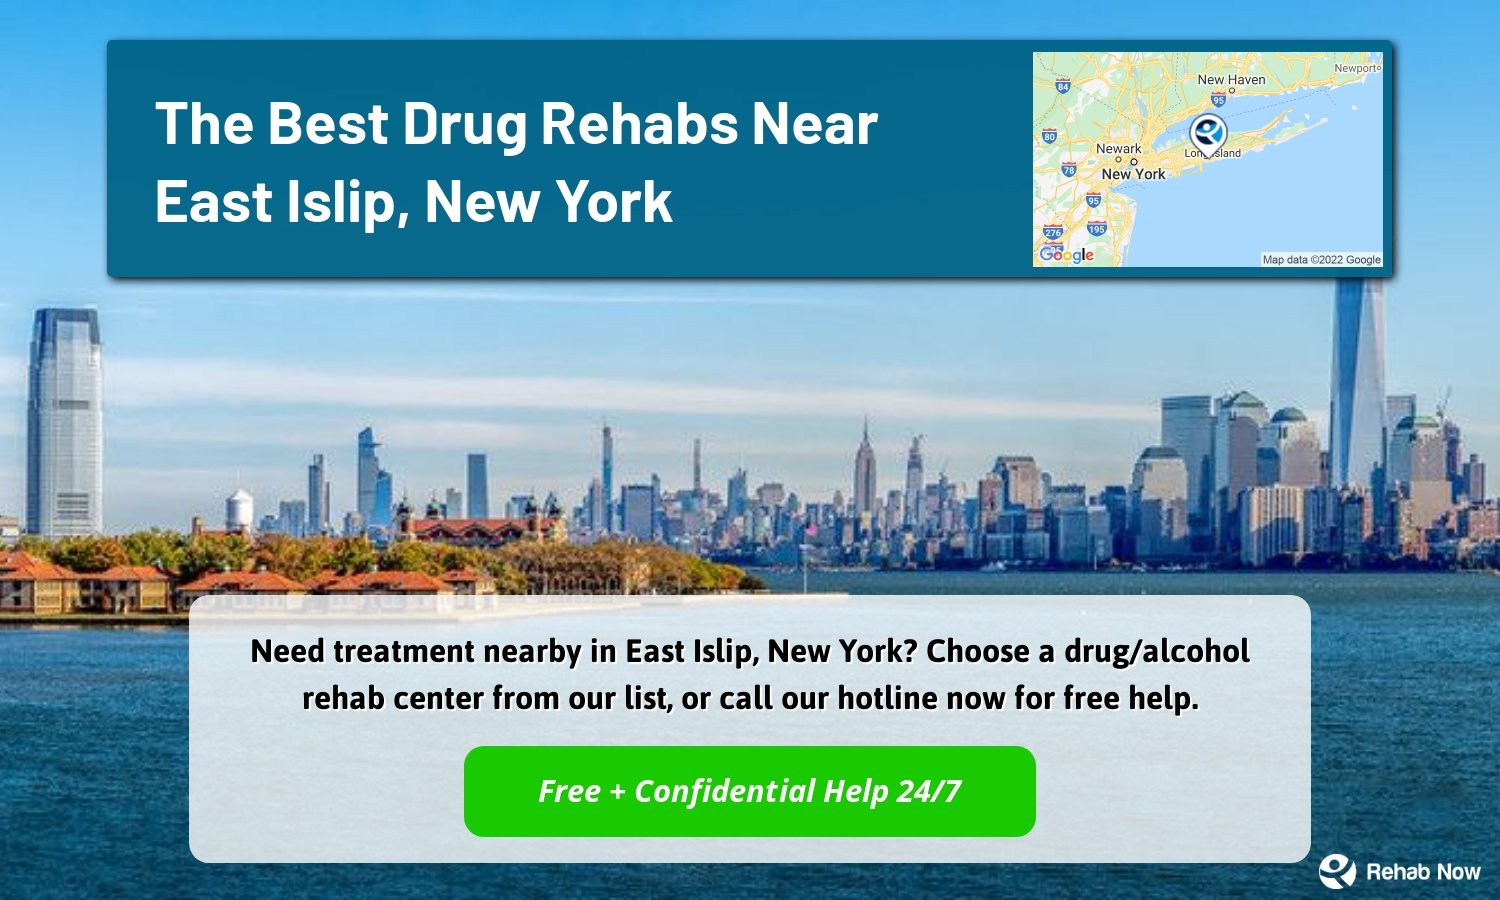 Need treatment nearby in East Islip, New York? Choose a drug/alcohol rehab center from our list, or call our hotline now for free help.